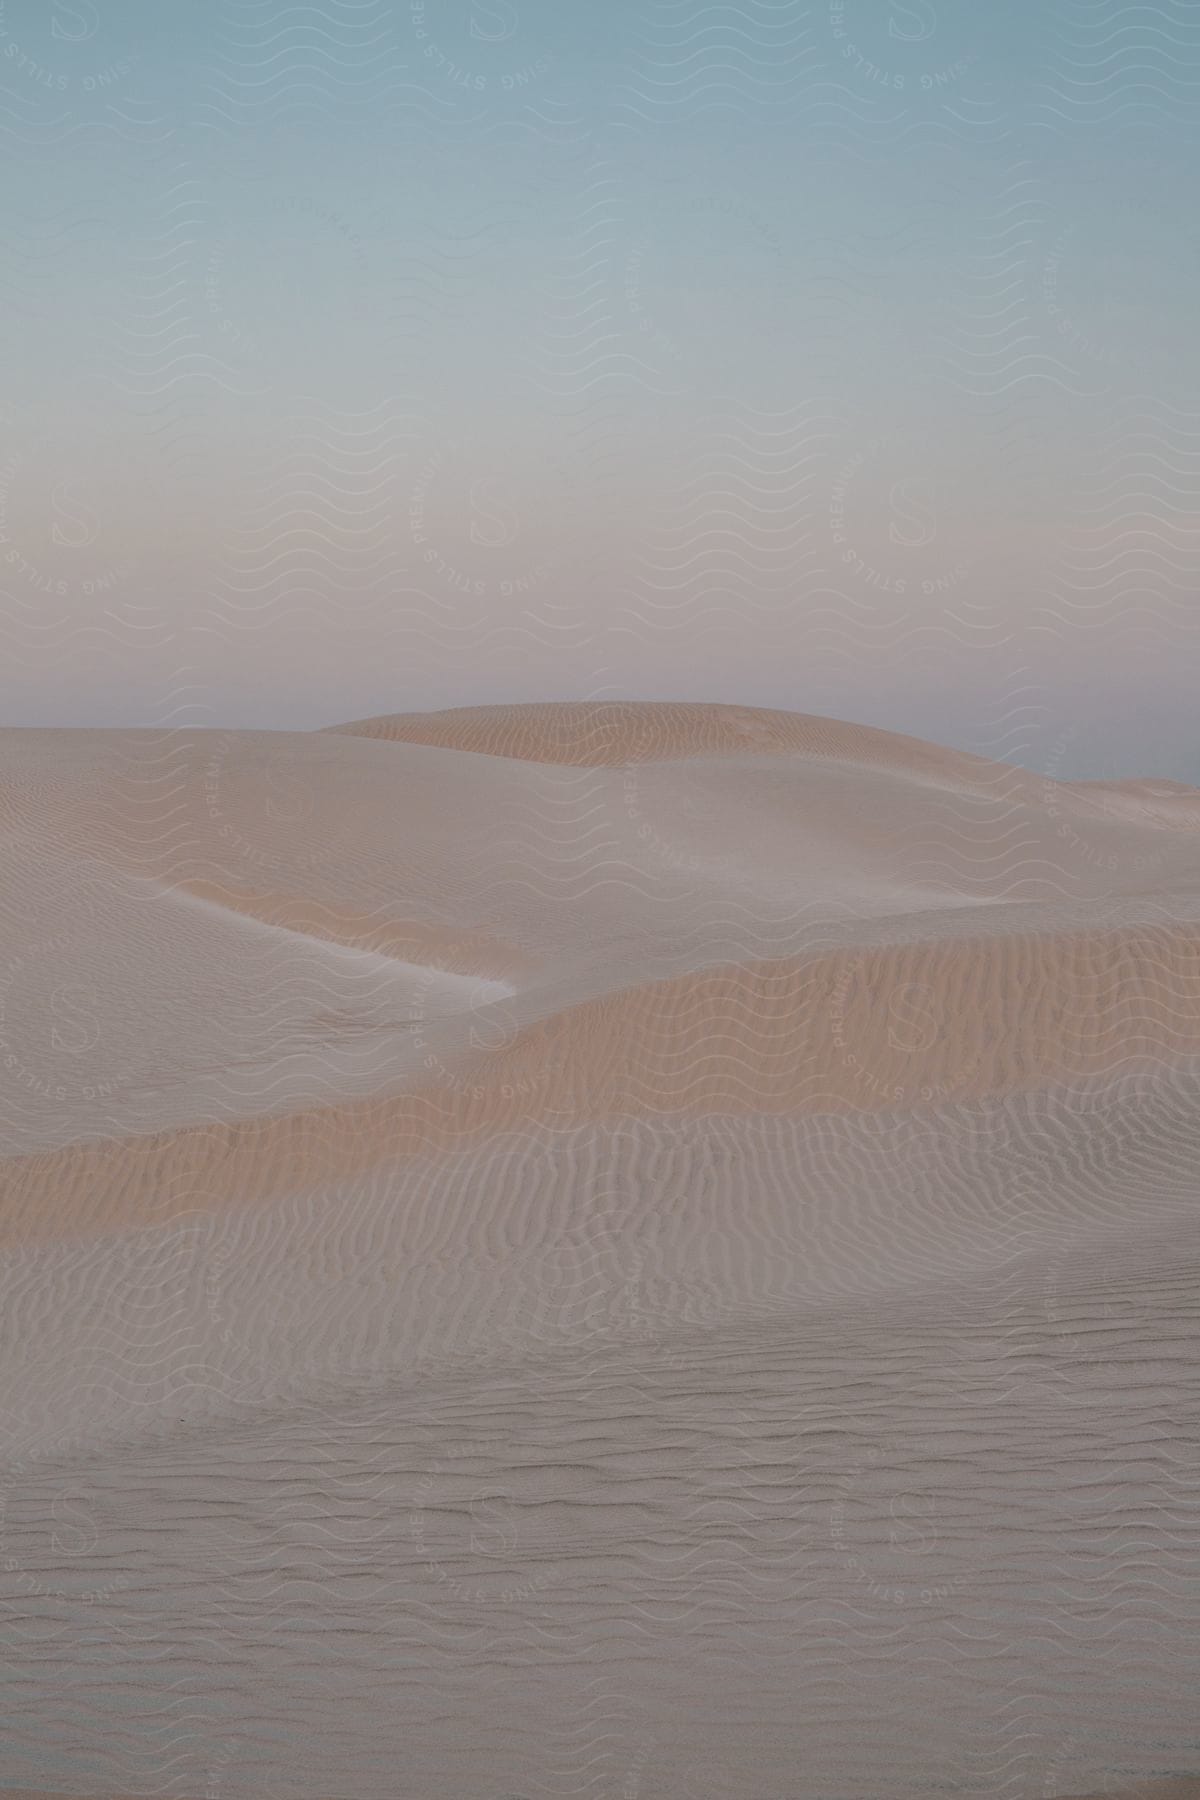 A sandcovered dune landscape with hills in an outdoor desert setting